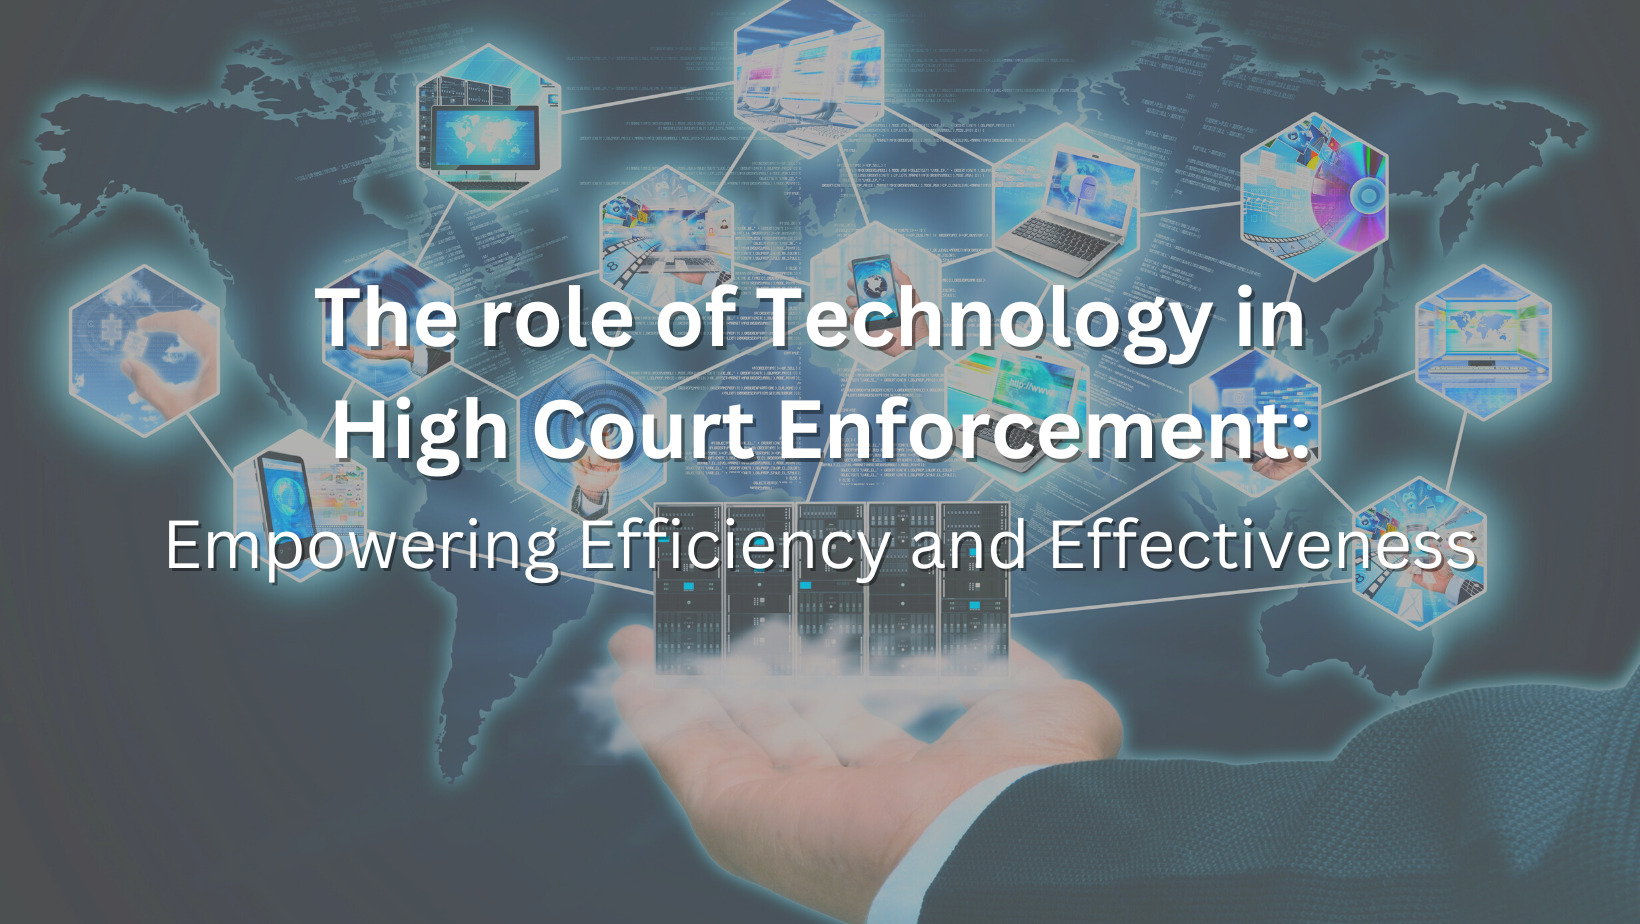 The role of Technology in High Court Enforcement: Empowering Efficiency and Effectiveness